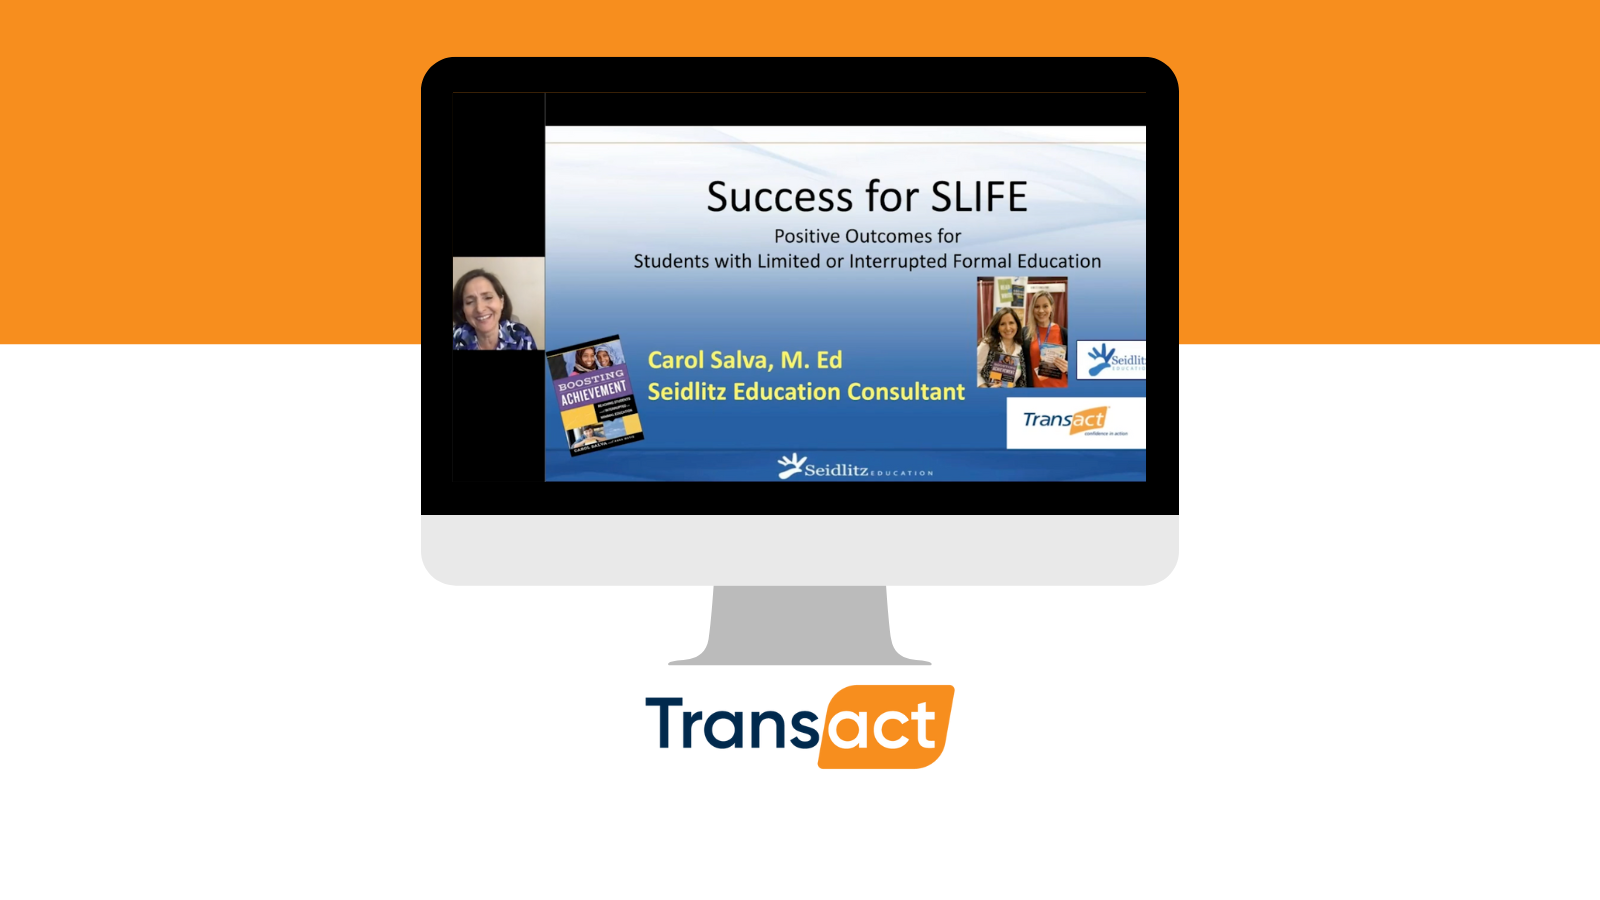 Success for S(L)IFE: Students with limited or interrupted formal education